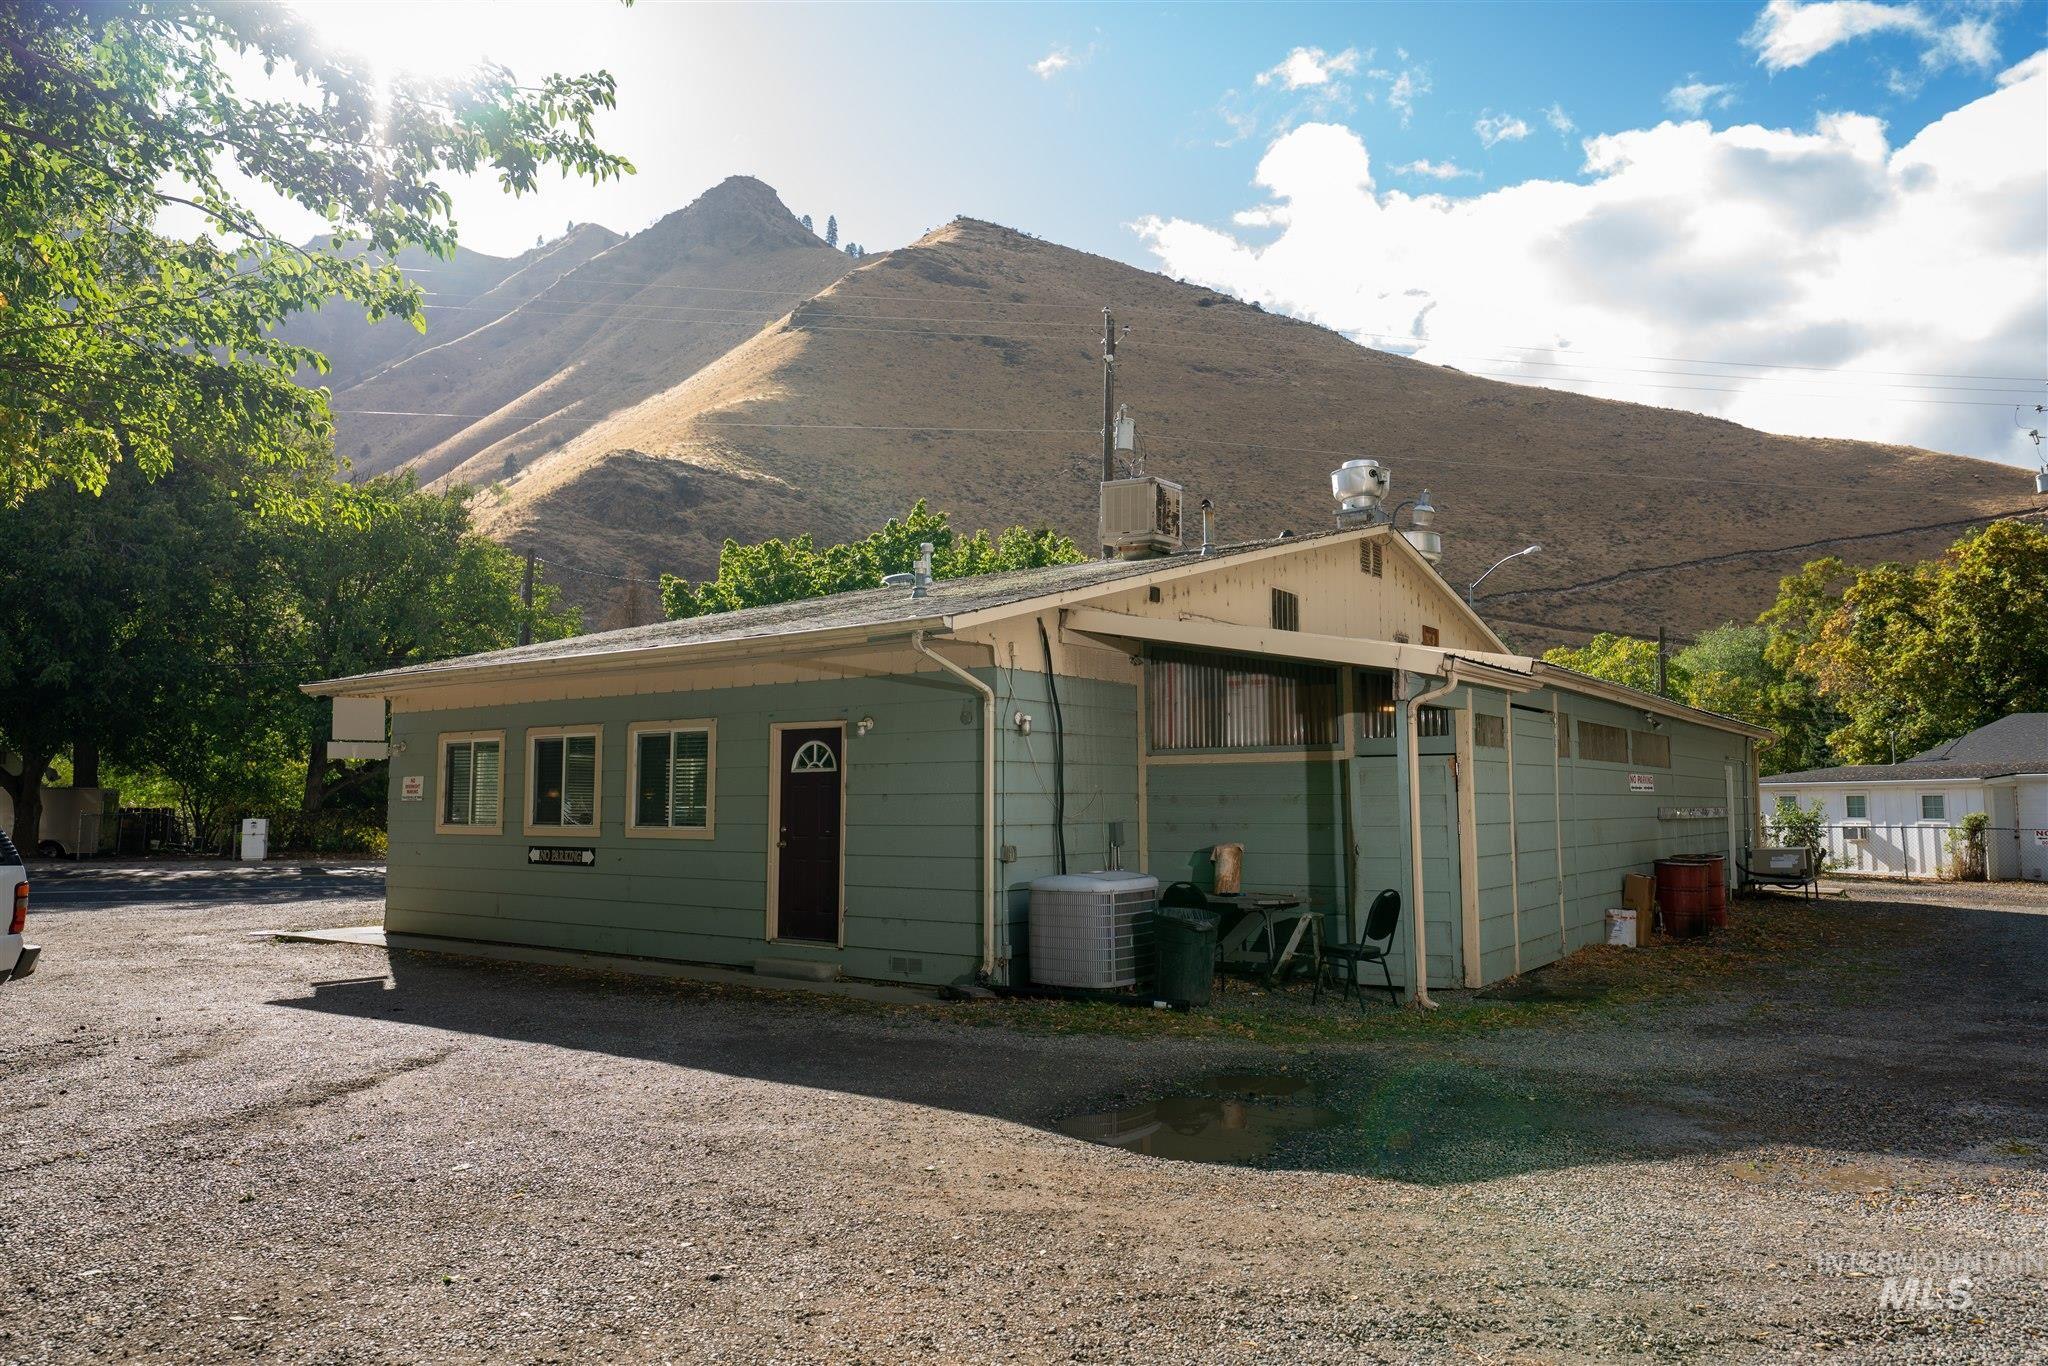 1149 S Main St., Riggins, Idaho 83549, Business/Commercial For Sale, Price $495,000,MLS 98889548